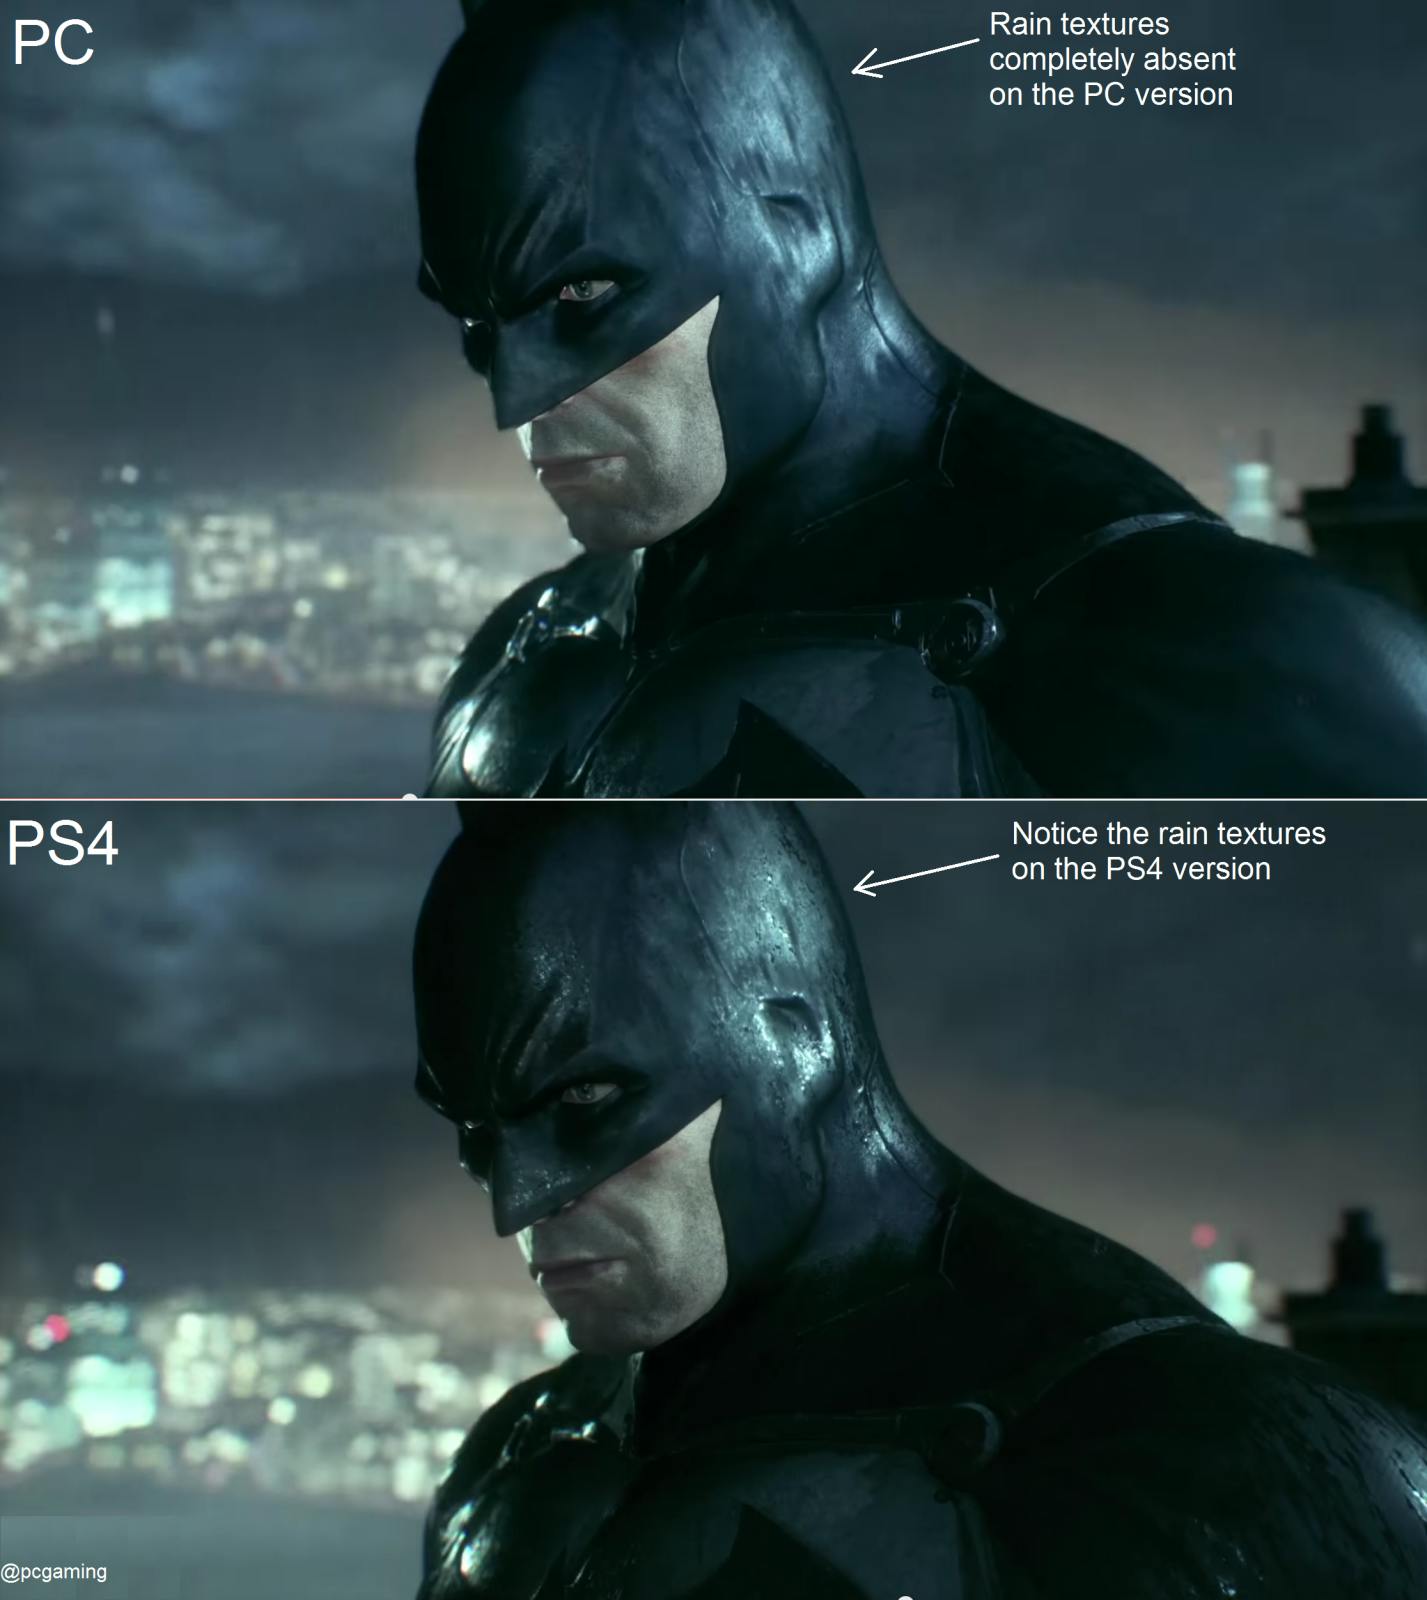 Batman: Arkham Knight System Requirements: Can You Run It?